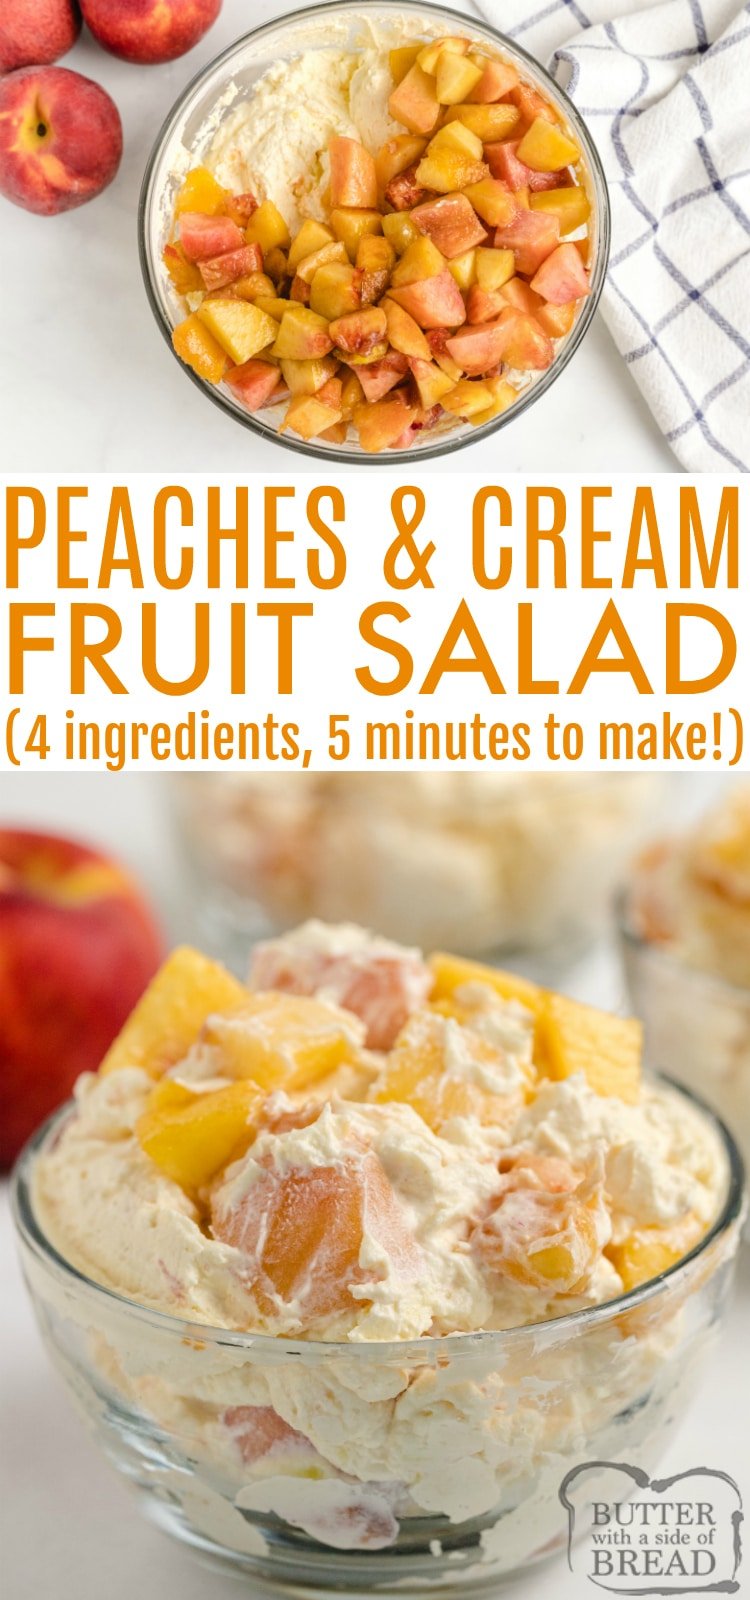 Peaches and Cream Salad is made with fresh peaches and makes a wonderful side dish or even a dessert! This easy fruit salad is made in less than 5 minutes with only 4 ingredients!